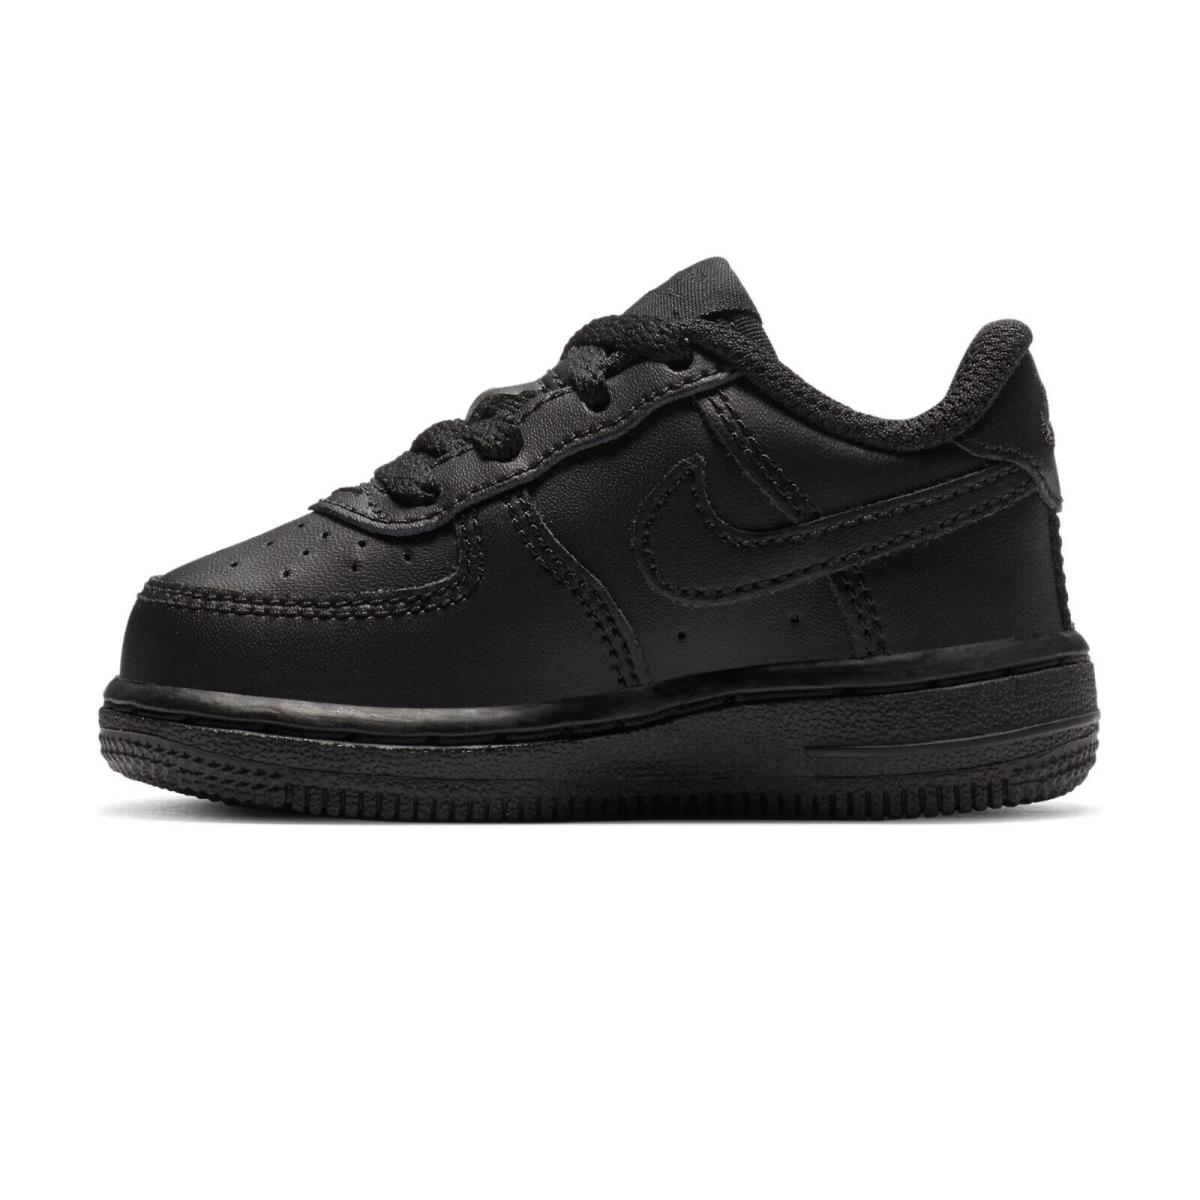 Nike Force 1 TD 314194-001 Kid`s Black Running Sneaker Shoes Size US 6.5 HS2396